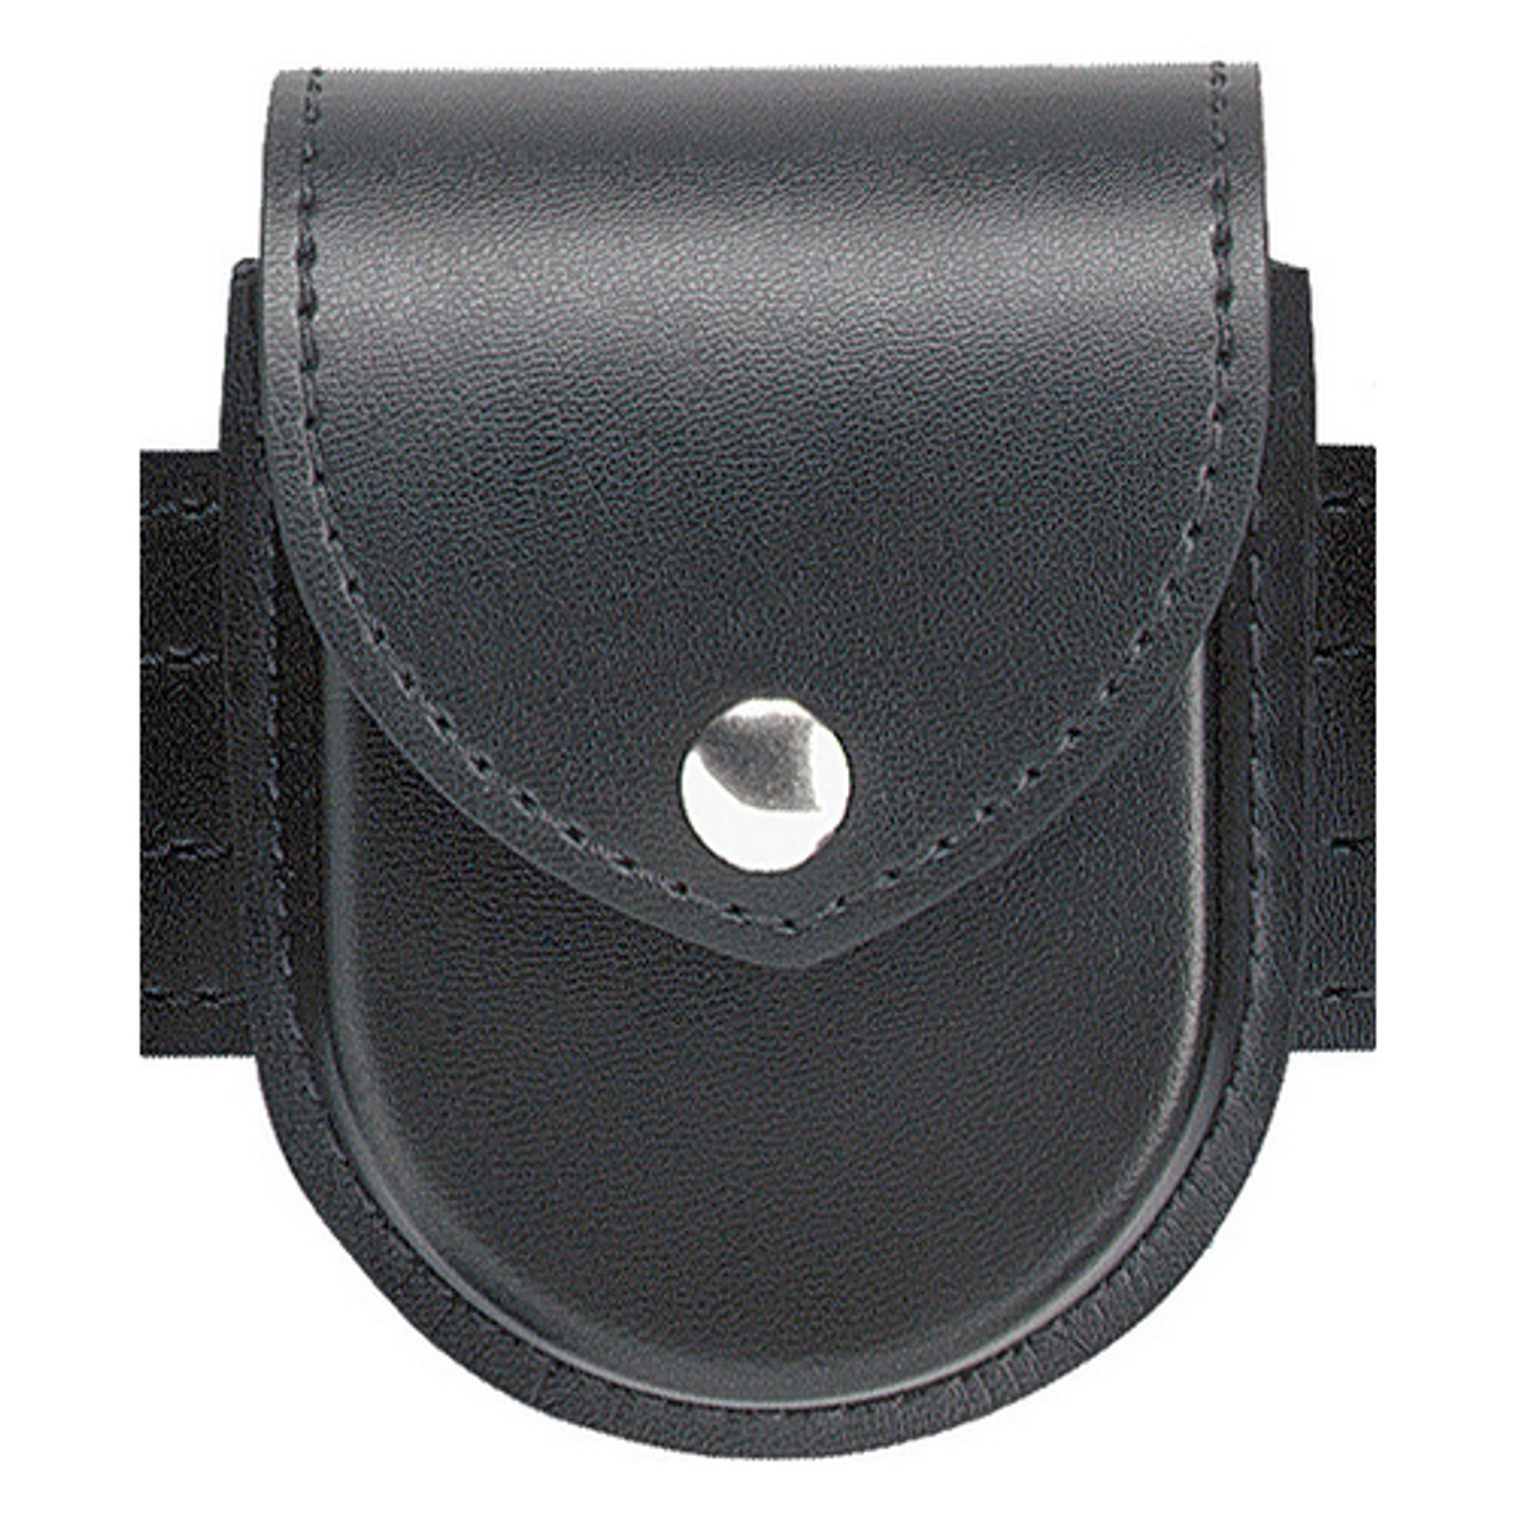 Model 290 Double Handcuff Pouch - 90-2HS